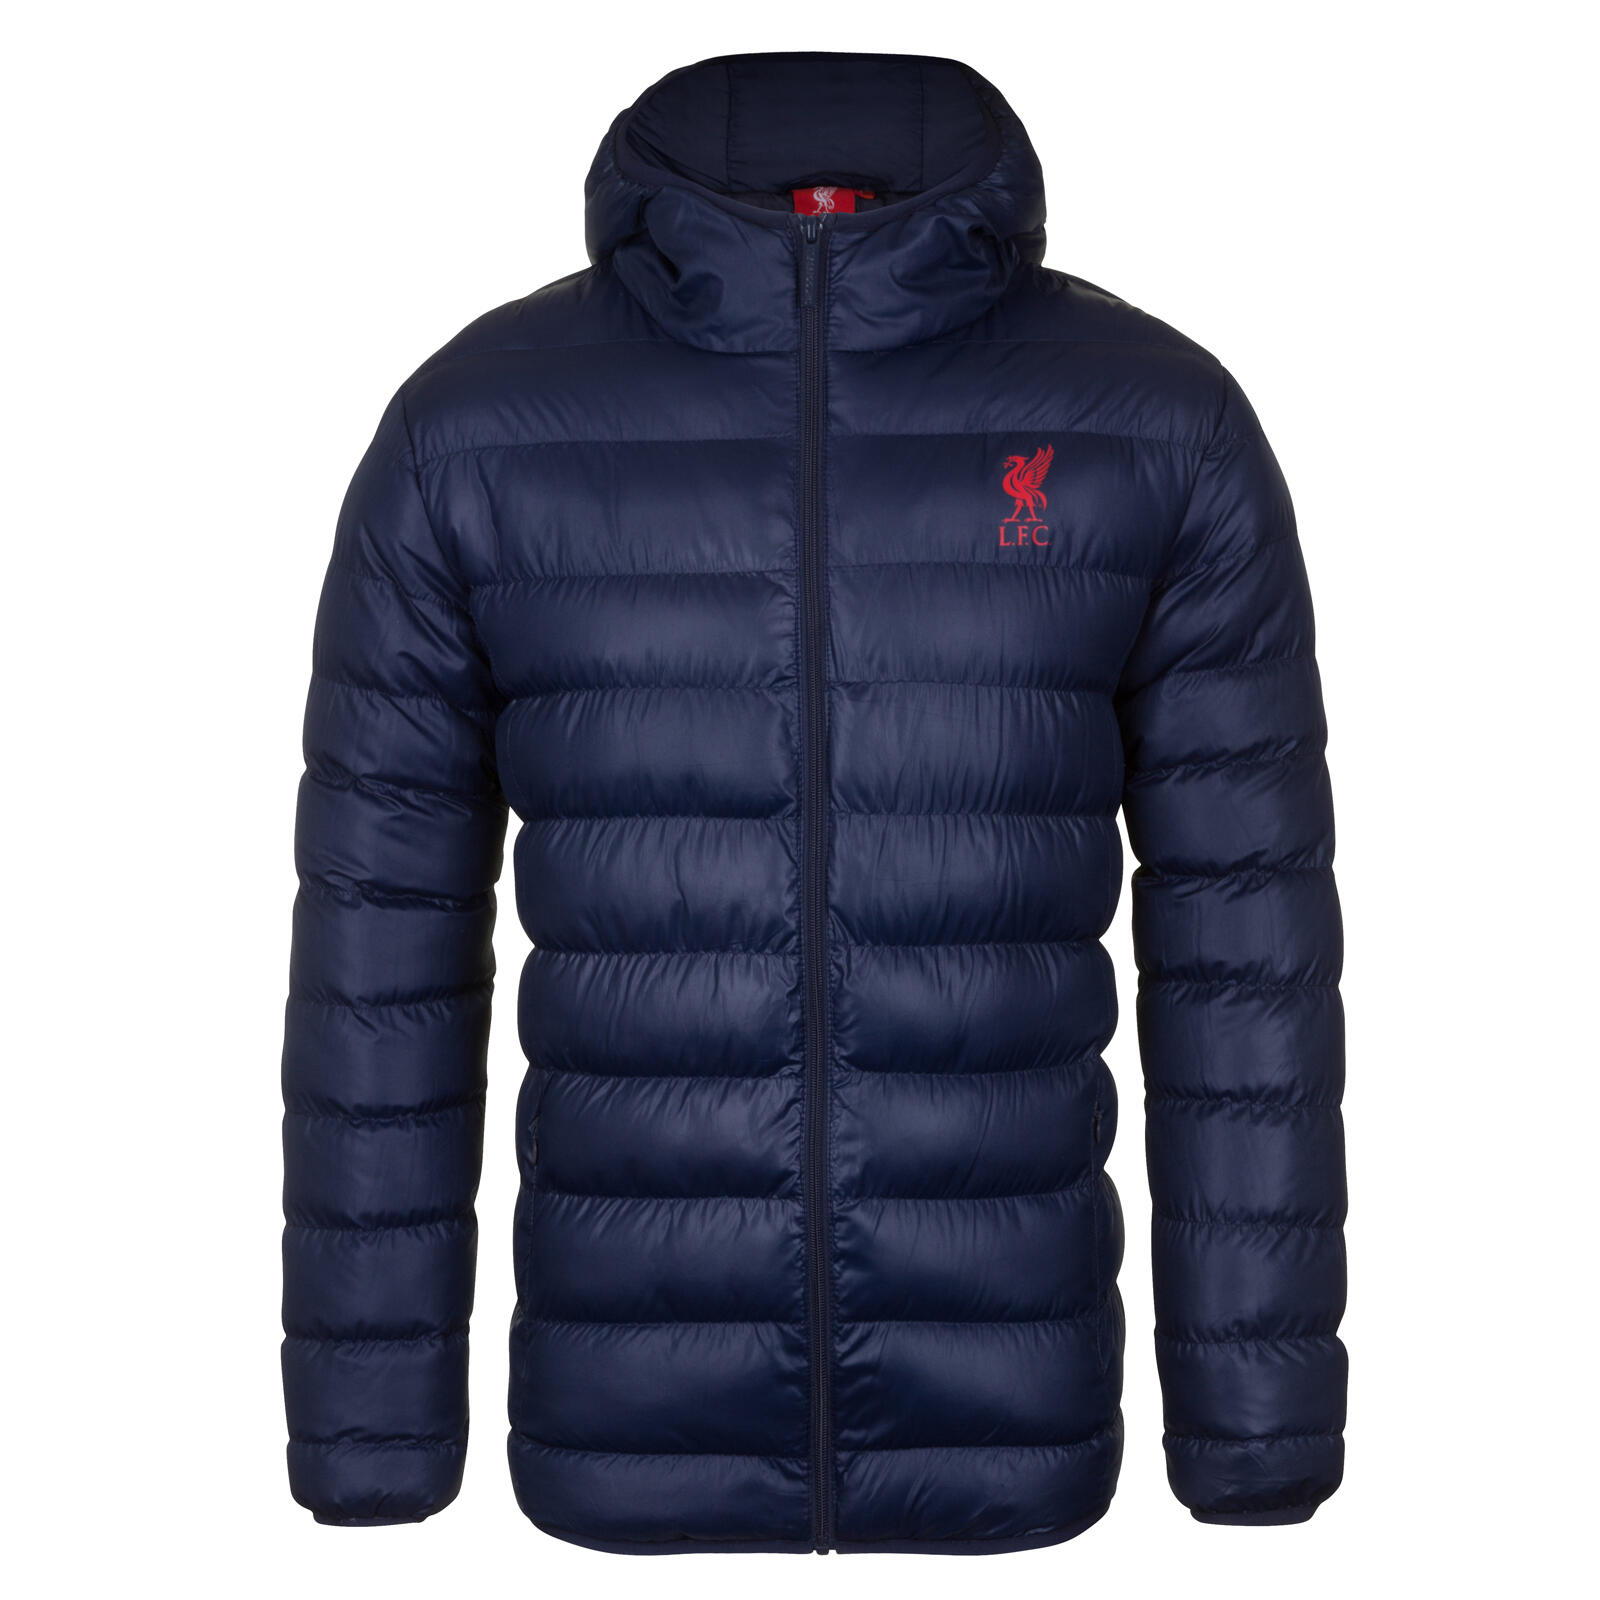 LIVERPOOL FC Liverpool FC Mens Jacket Hooded Winter Quilted OFFICIAL Football Gift